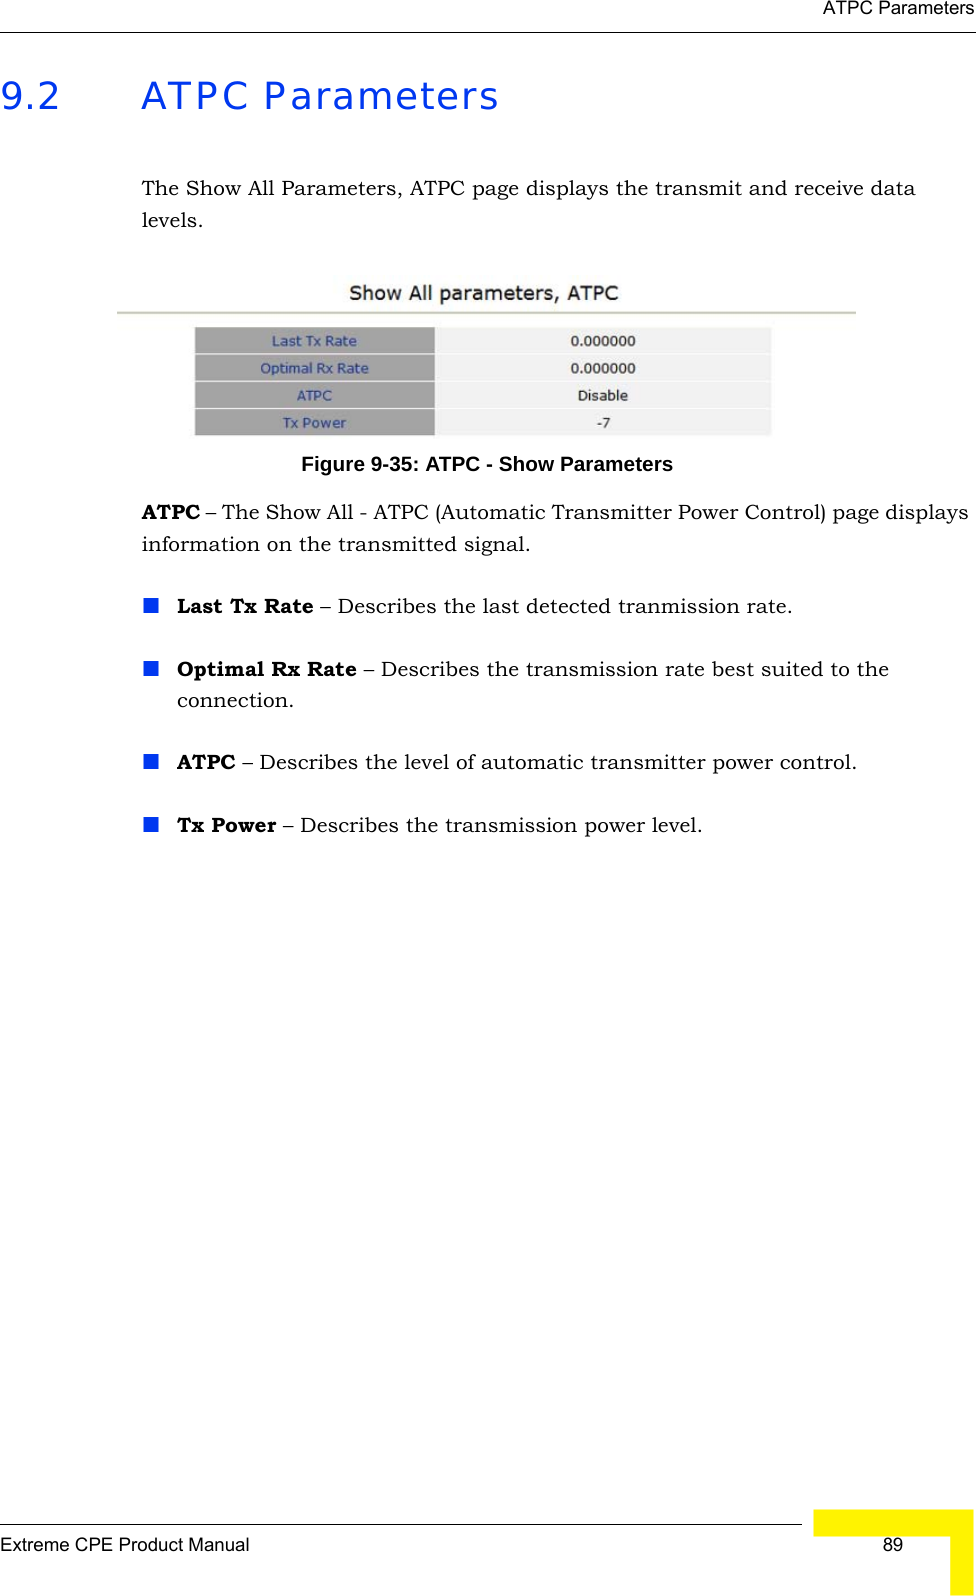 ATPC ParametersExtreme CPE Product Manual  899.2 ATPC ParametersThe Show All Parameters, ATPC page displays the transmit and receive data levels.Figure 9-35: ATPC - Show ParametersATPC – The Show All - ATPC (Automatic Transmitter Power Control) page displays information on the transmitted signal.Last Tx Rate – Describes the last detected tranmission rate.Optimal Rx Rate – Describes the transmission rate best suited to the connection.ATPC – Describes the level of automatic transmitter power control.Tx Power – Describes the transmission power level.